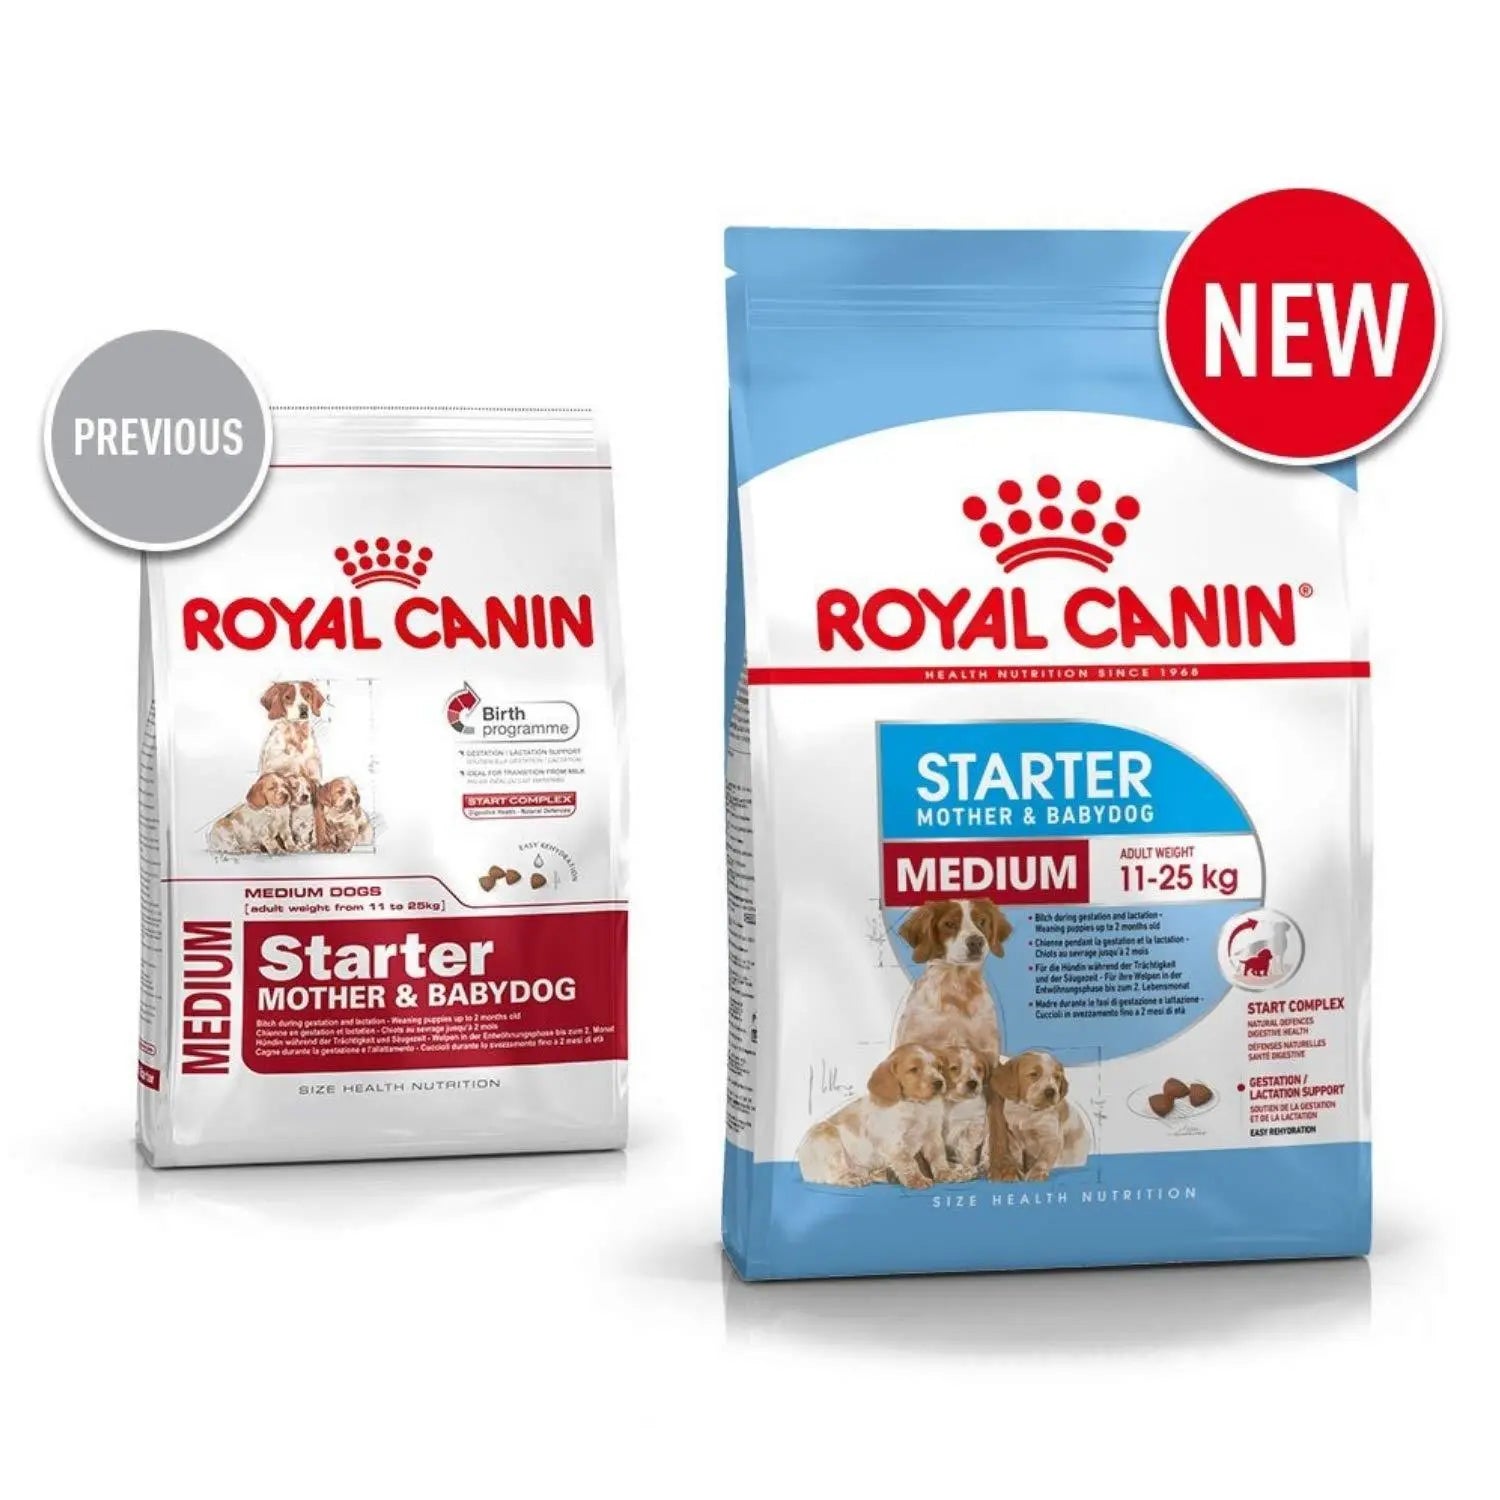 Royal Canin Medium Starter, for Mother and Baby Dog (1 KG) Royal Canin